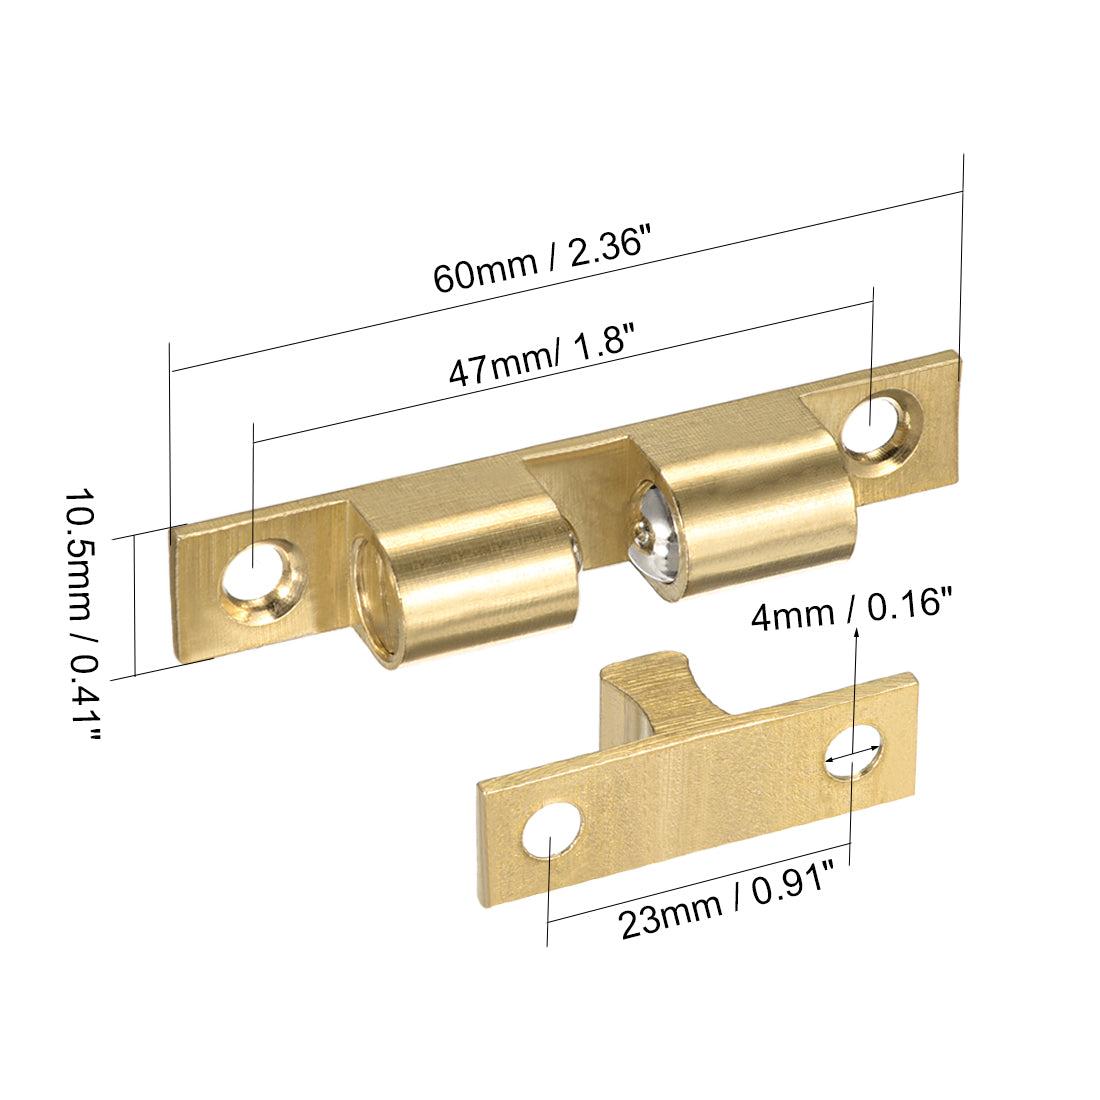 uxcell Uxcell Cabinet Door Closet Brass Double Ball Catch Tension Latch 60mm Length Gold Tone